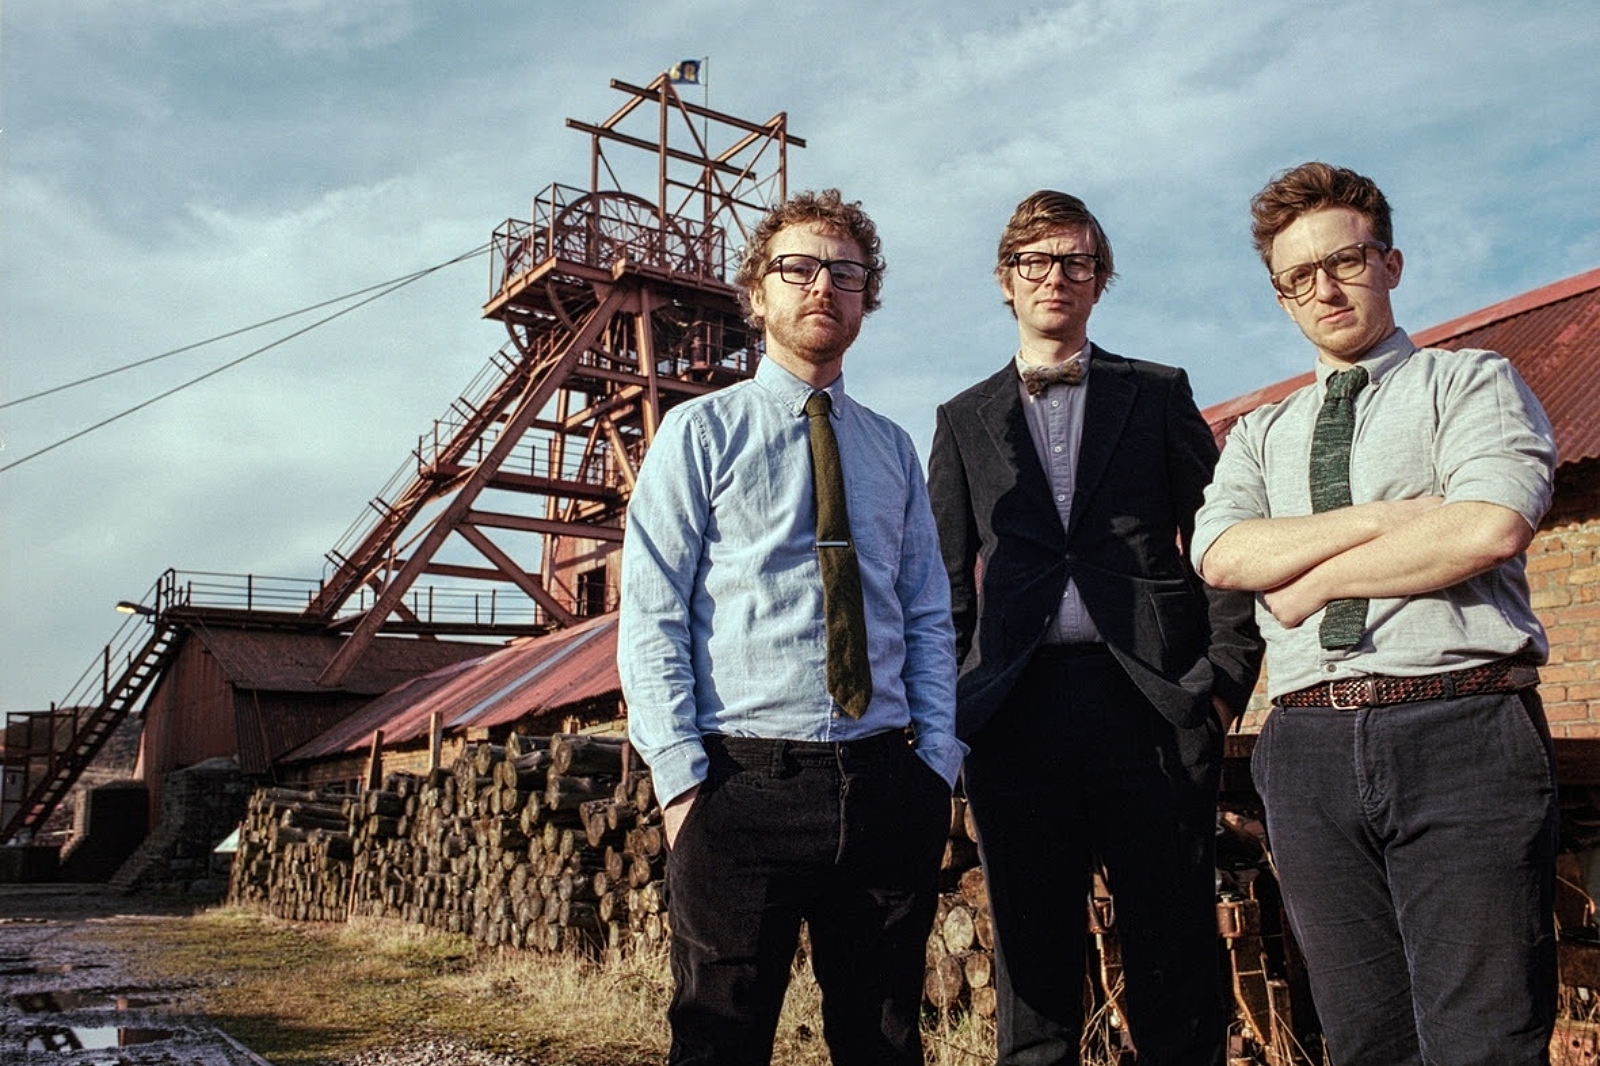 Public Service Broadcasting to play Caerphilly Castle